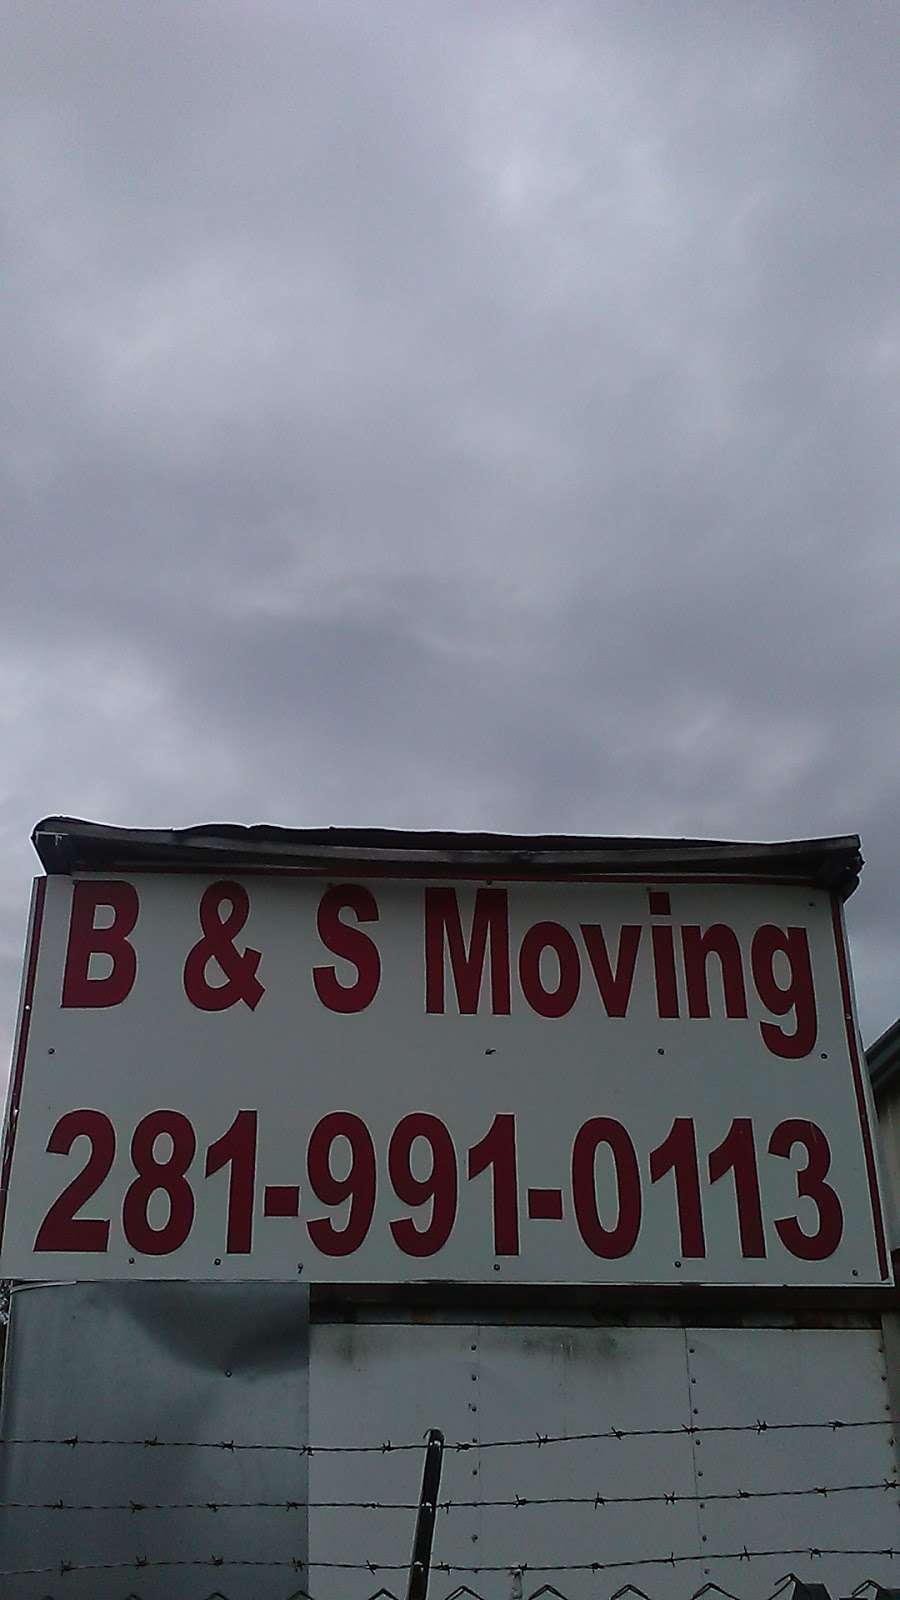 B & S Moving & Delivery | 4830 Red Bluff Rd, Pasadena, TX 77503 | Phone: (281) 991-0113